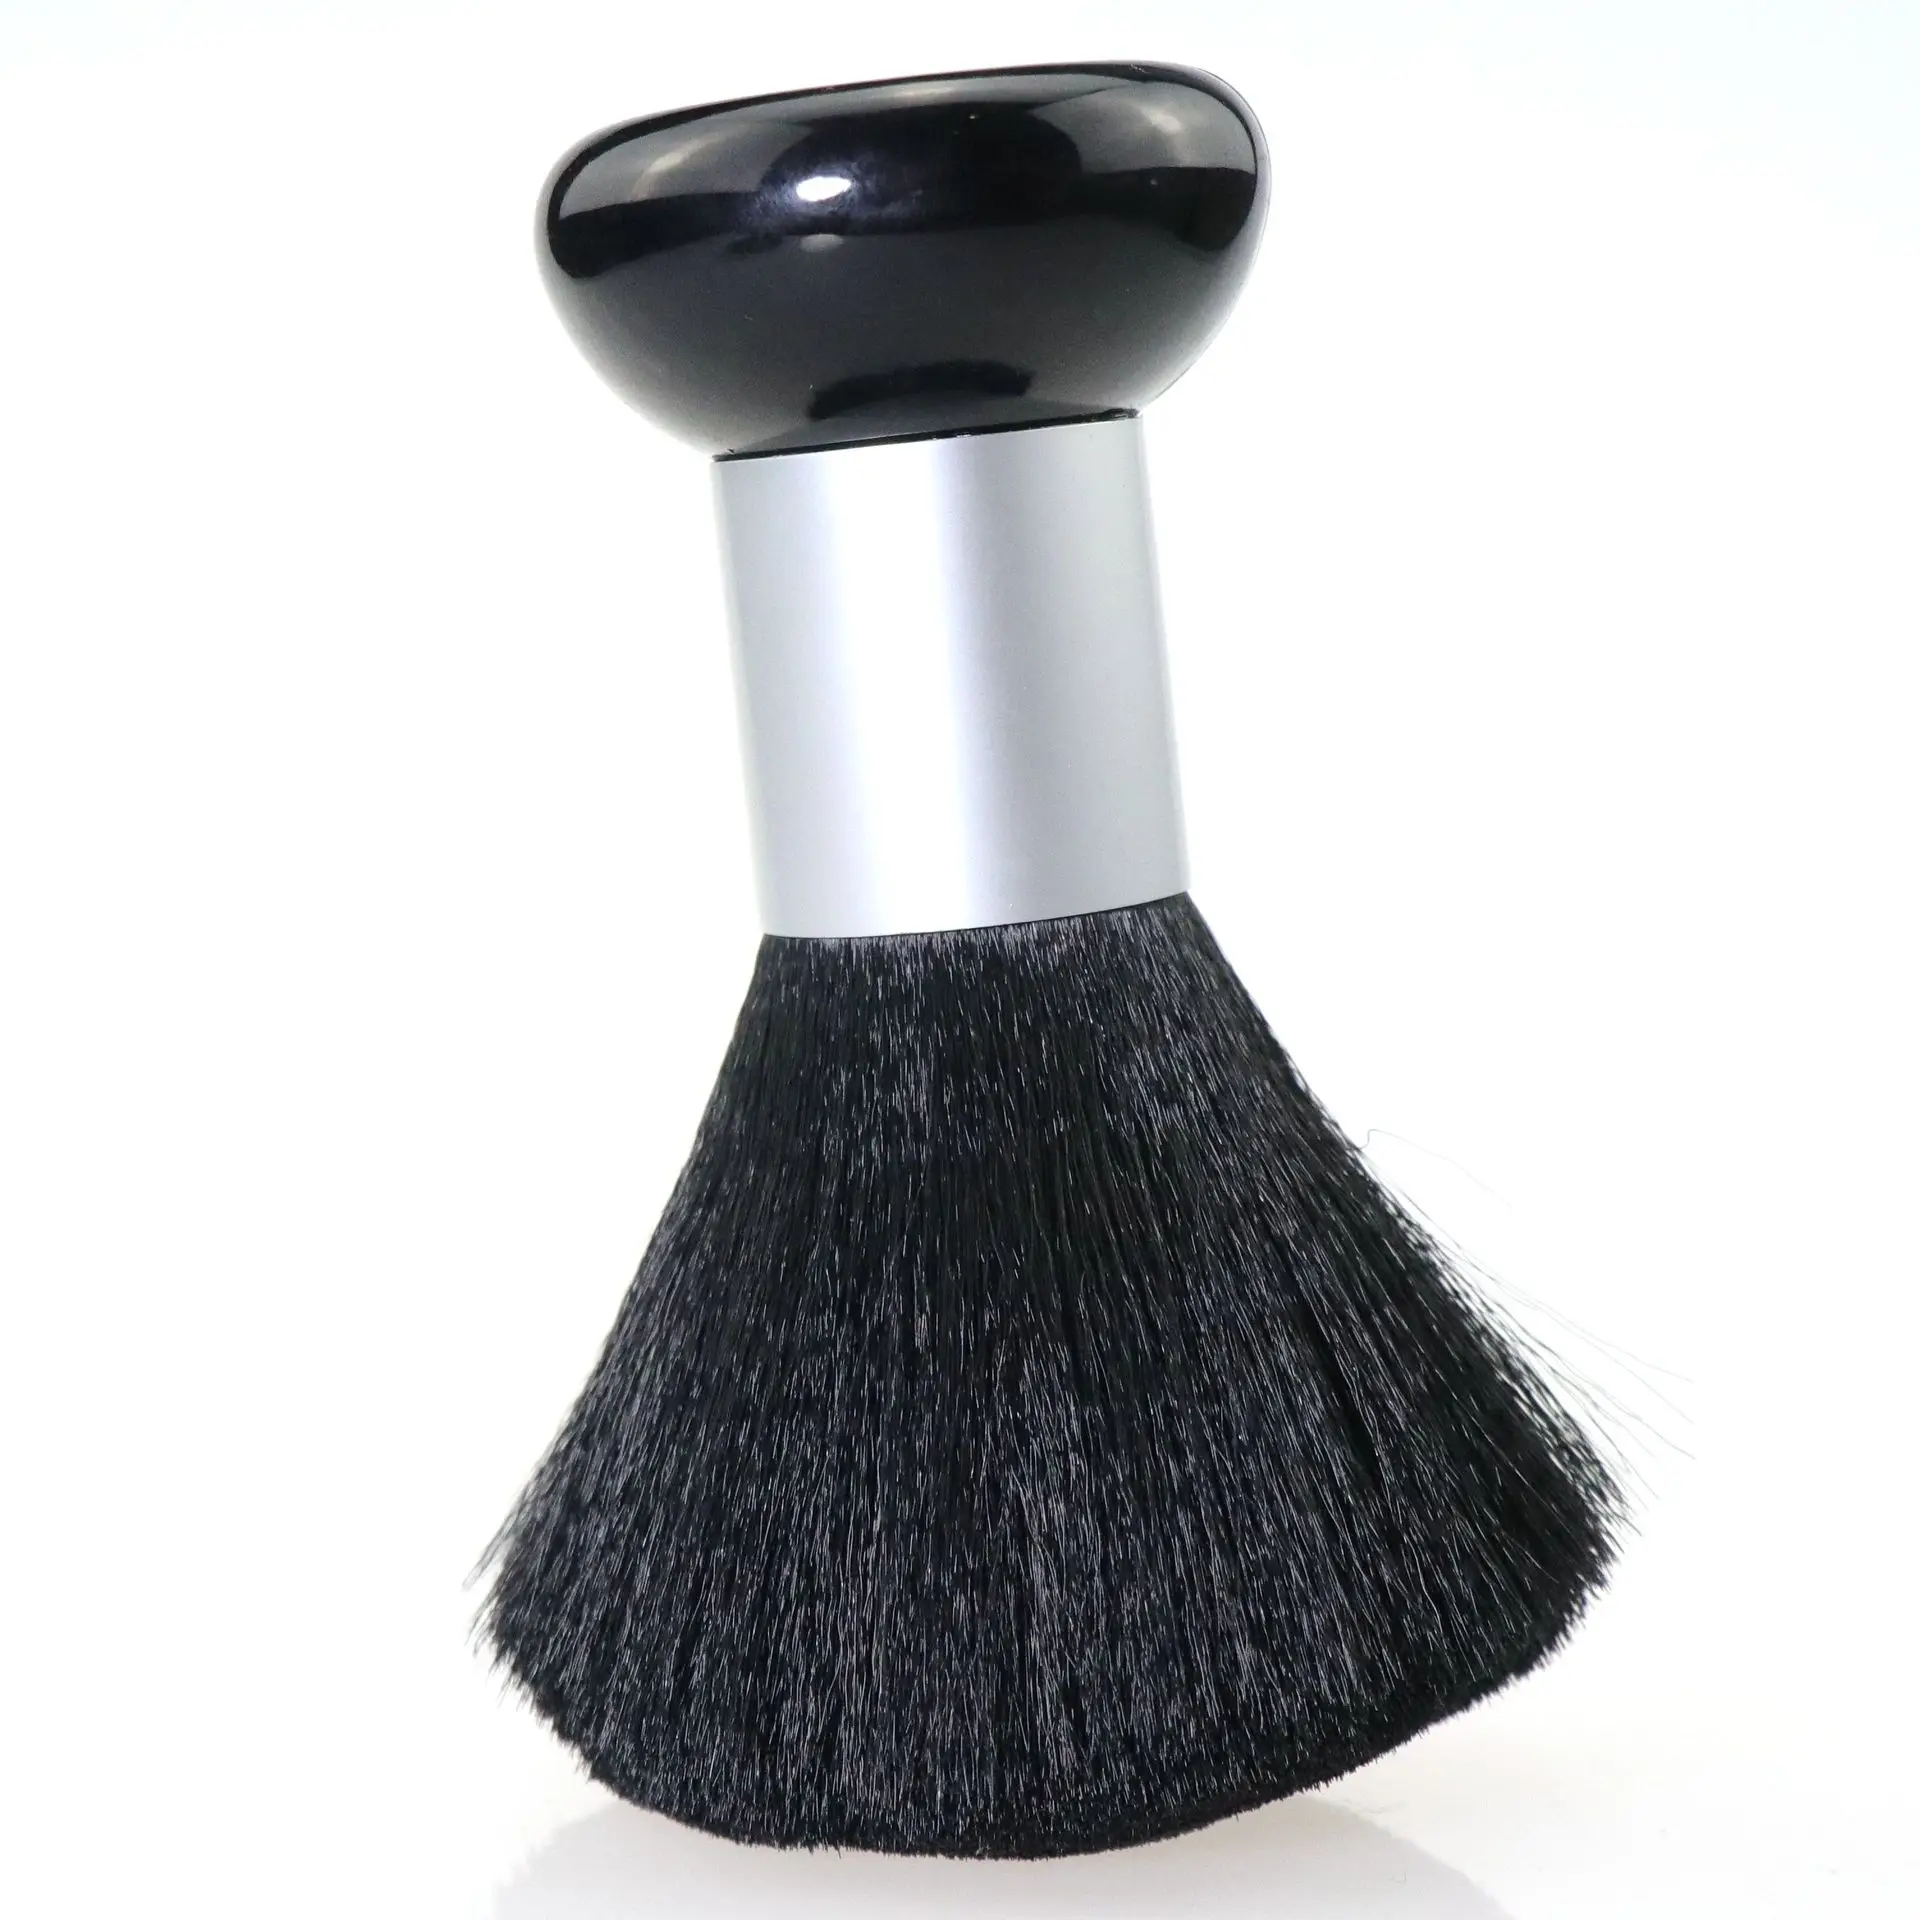 

Soft Fibers Black Neck Face Duster Beard Brushes Barber Hair Clean Hairbrush Salon Cutting Hairdressing Styling Makeup Tool